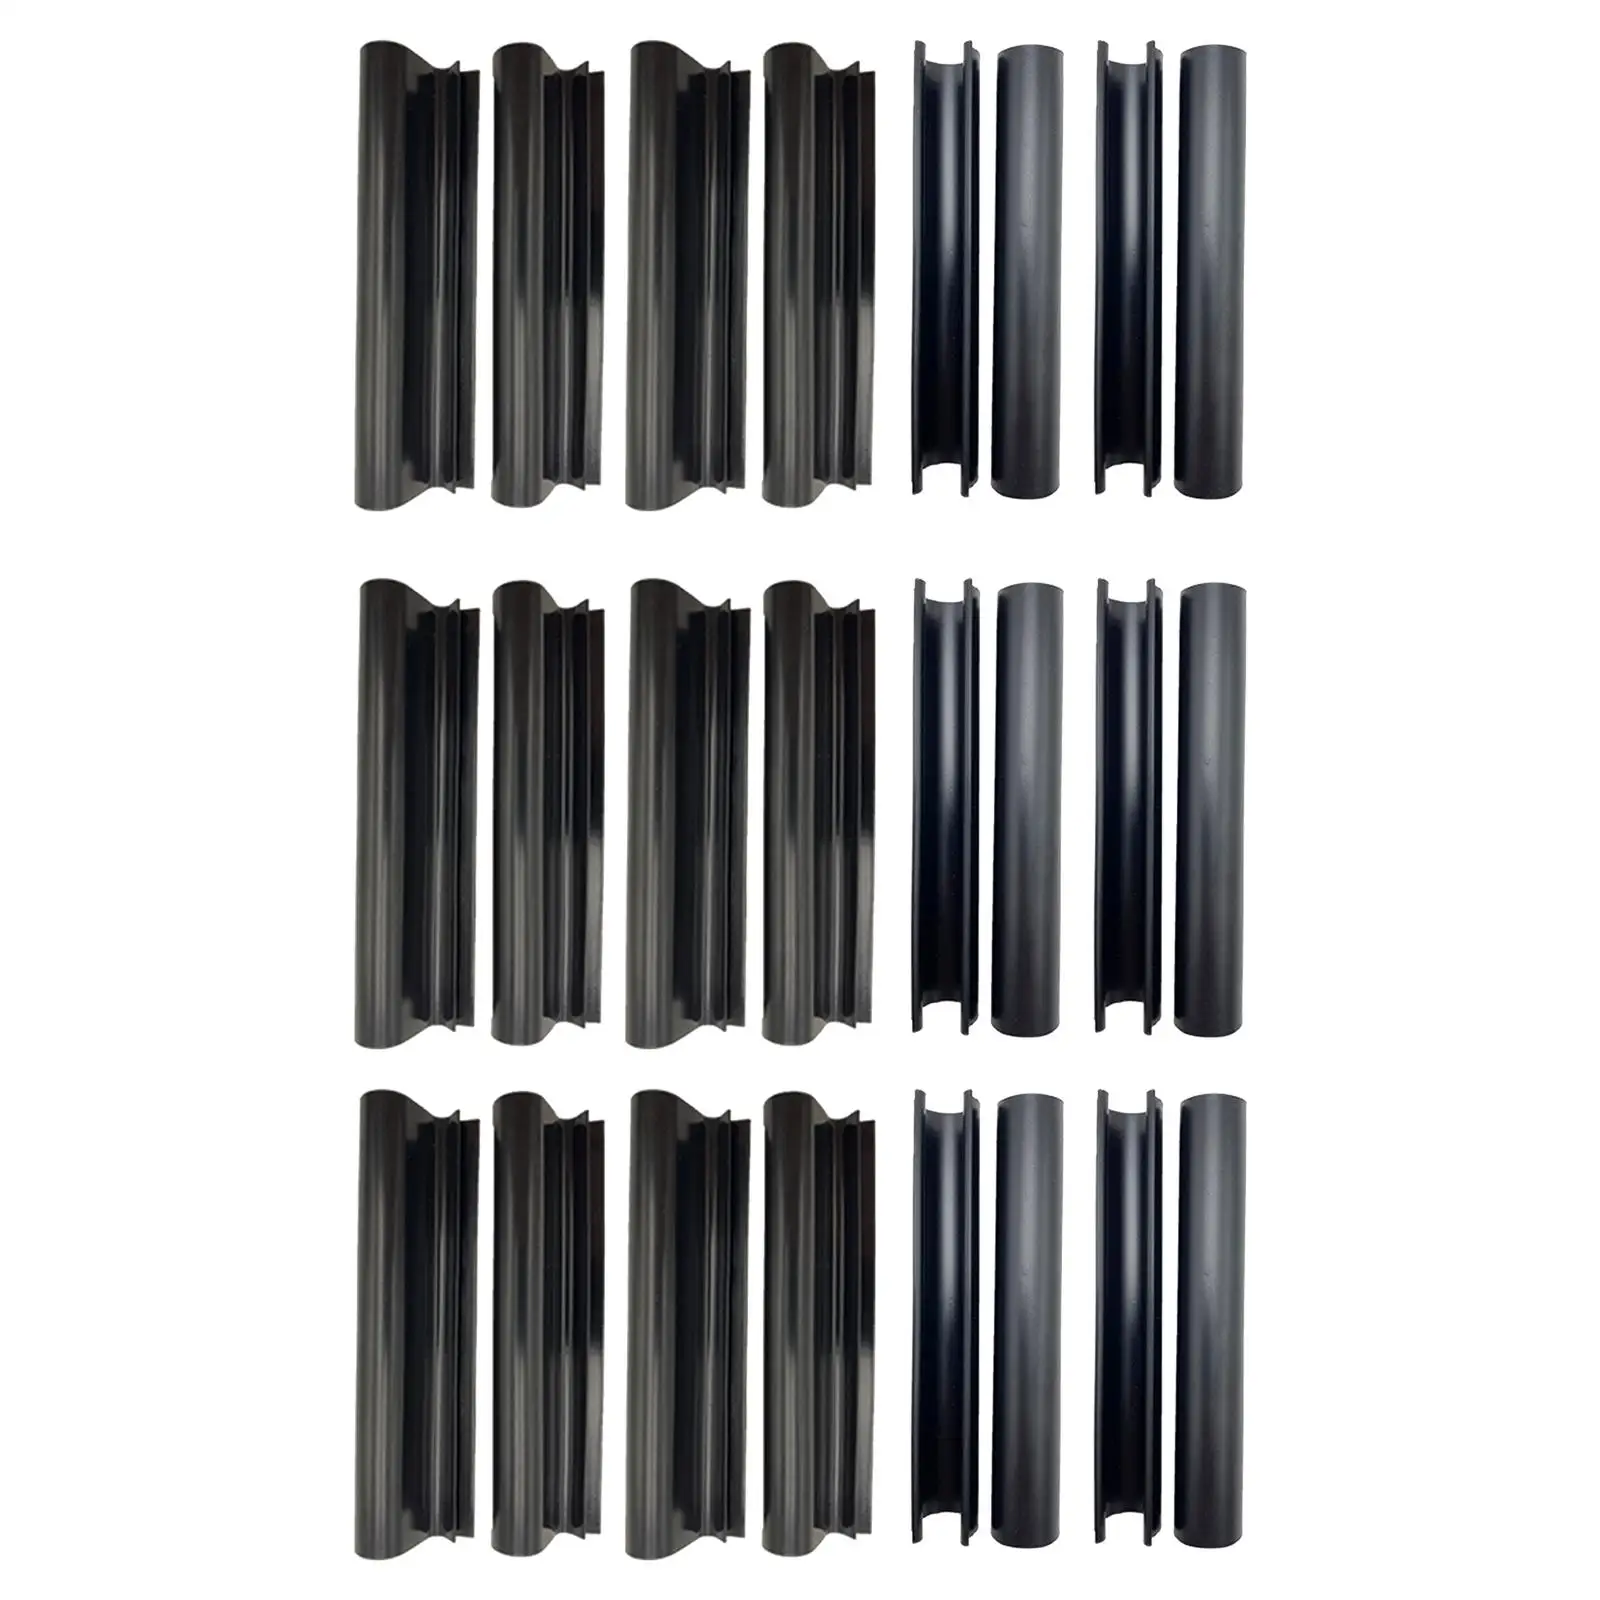 Reusable pools covers Clips Securing Clip Accessories steel Wall Pools 24Pcs for Tarpaulin